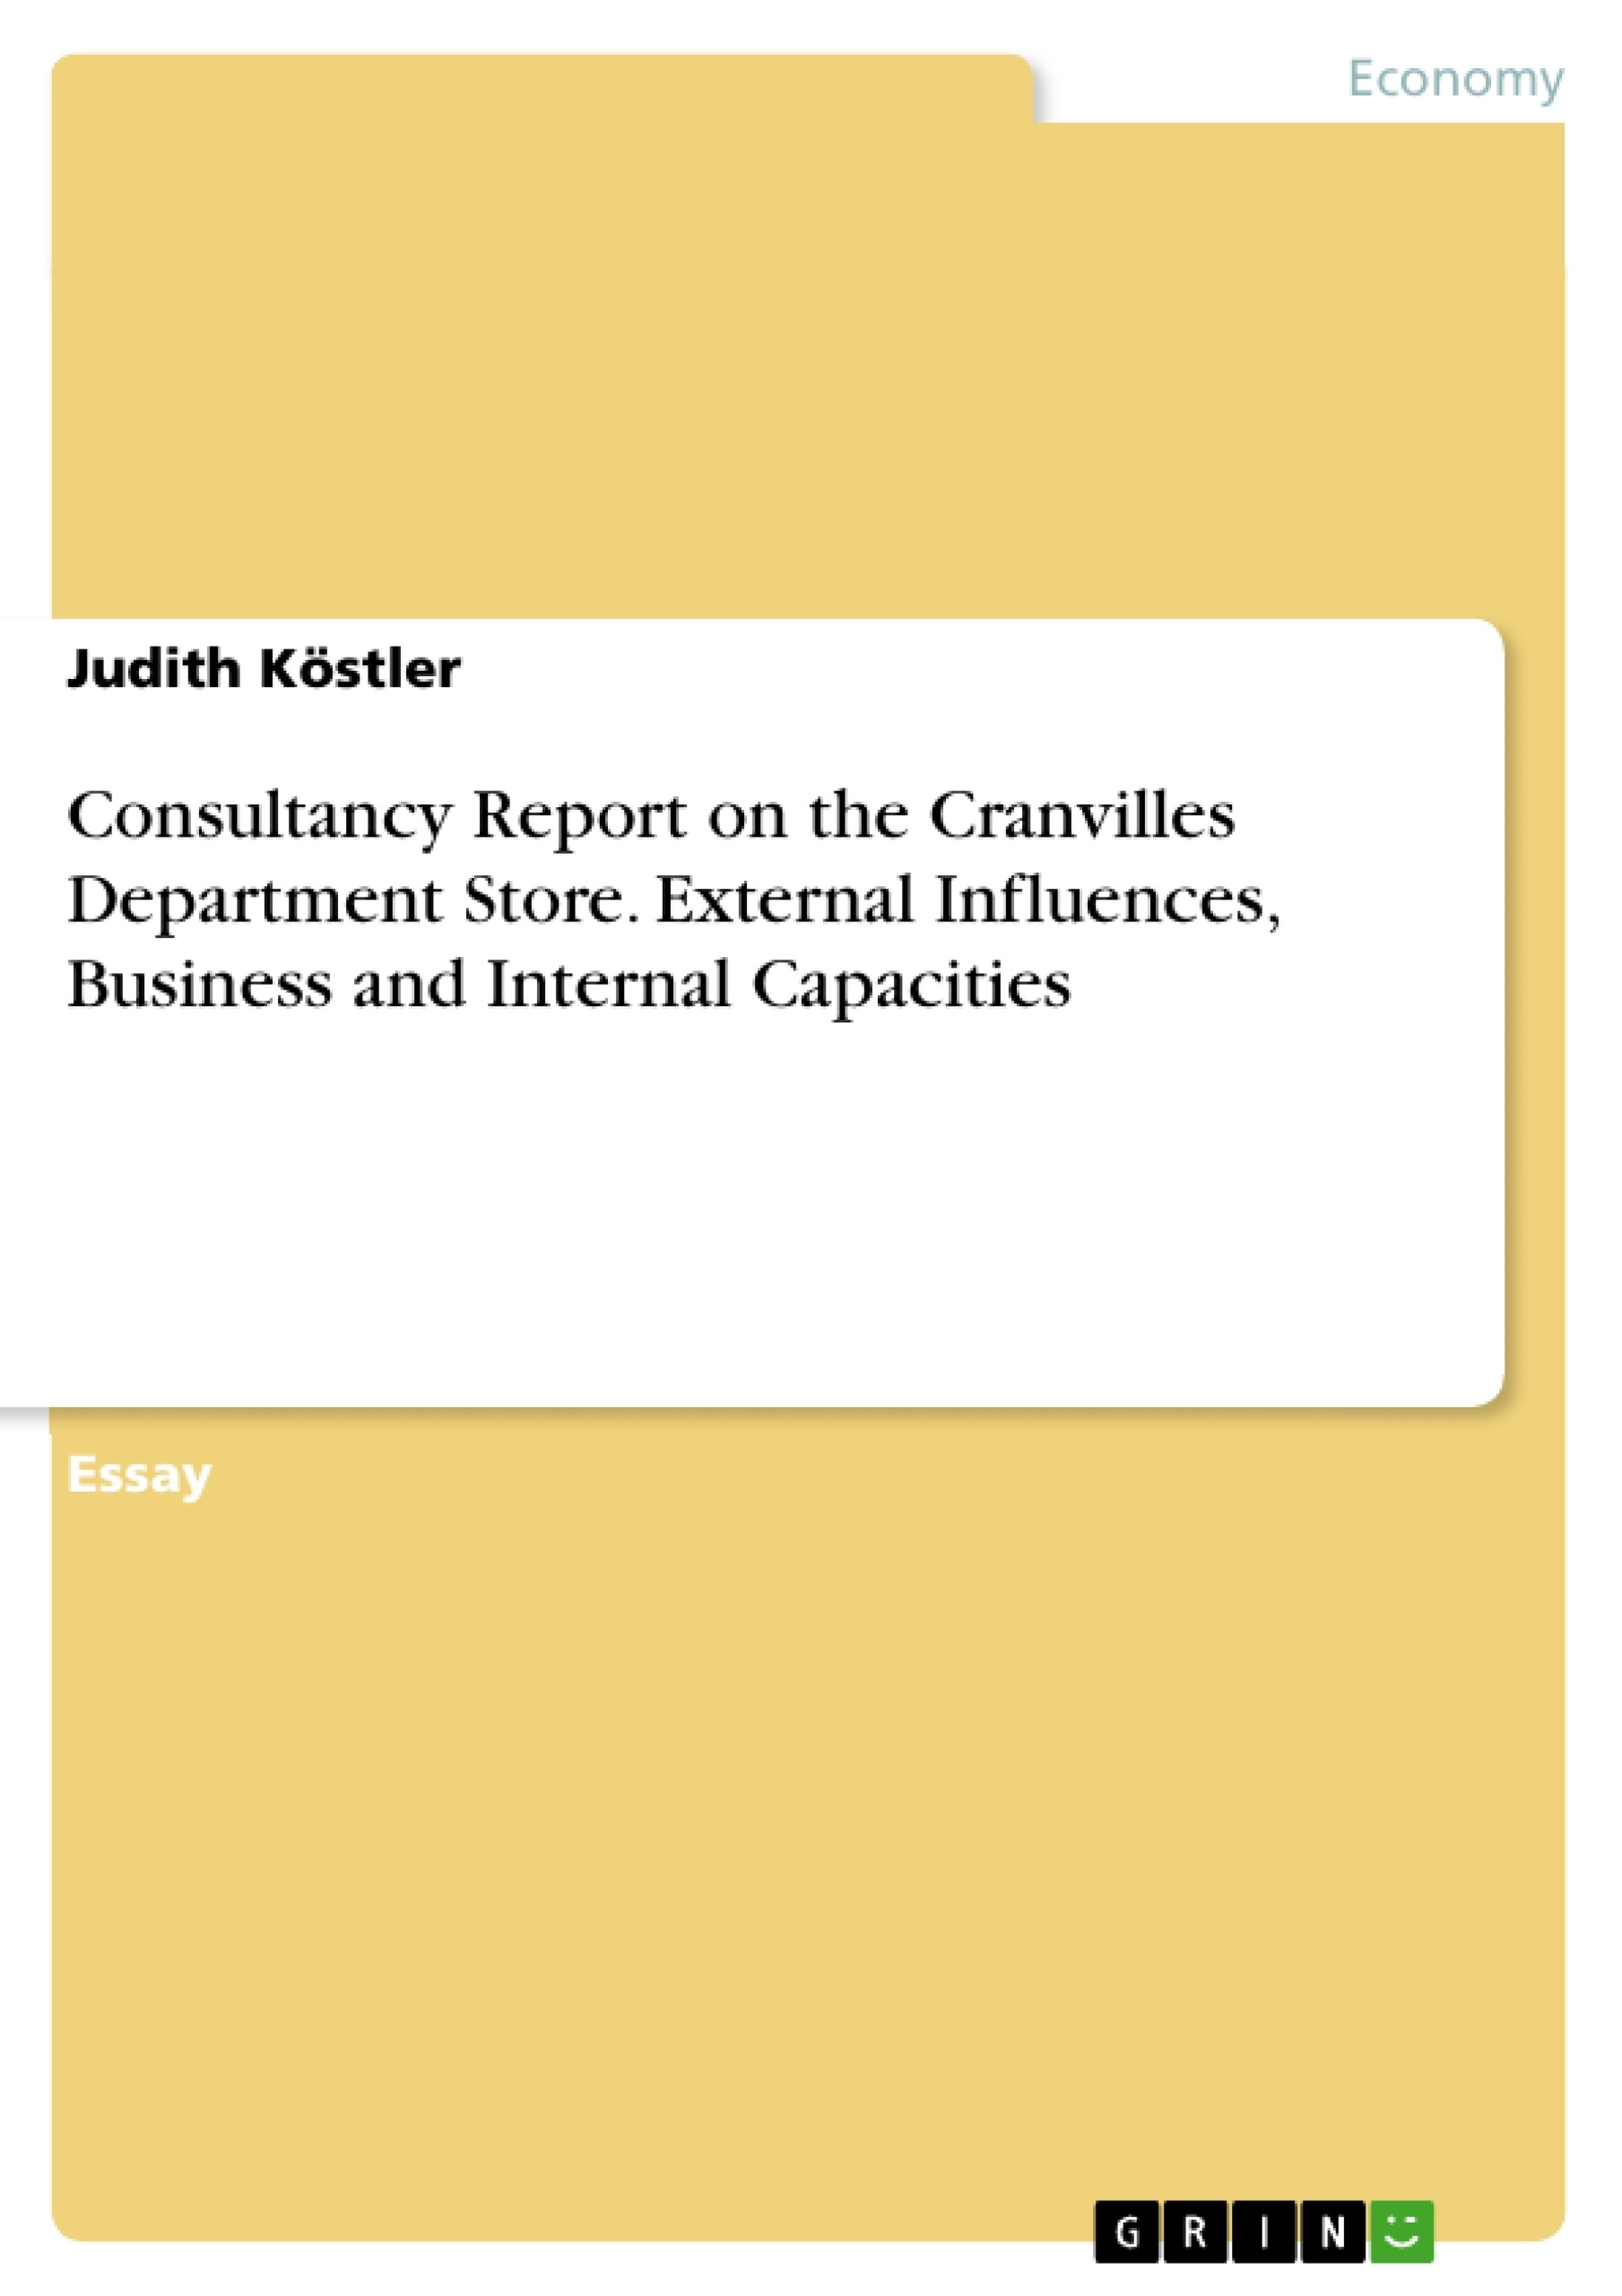 Titel: Consultancy Report on the Cranvilles Department Store. External Influences, Business and Internal Capacities